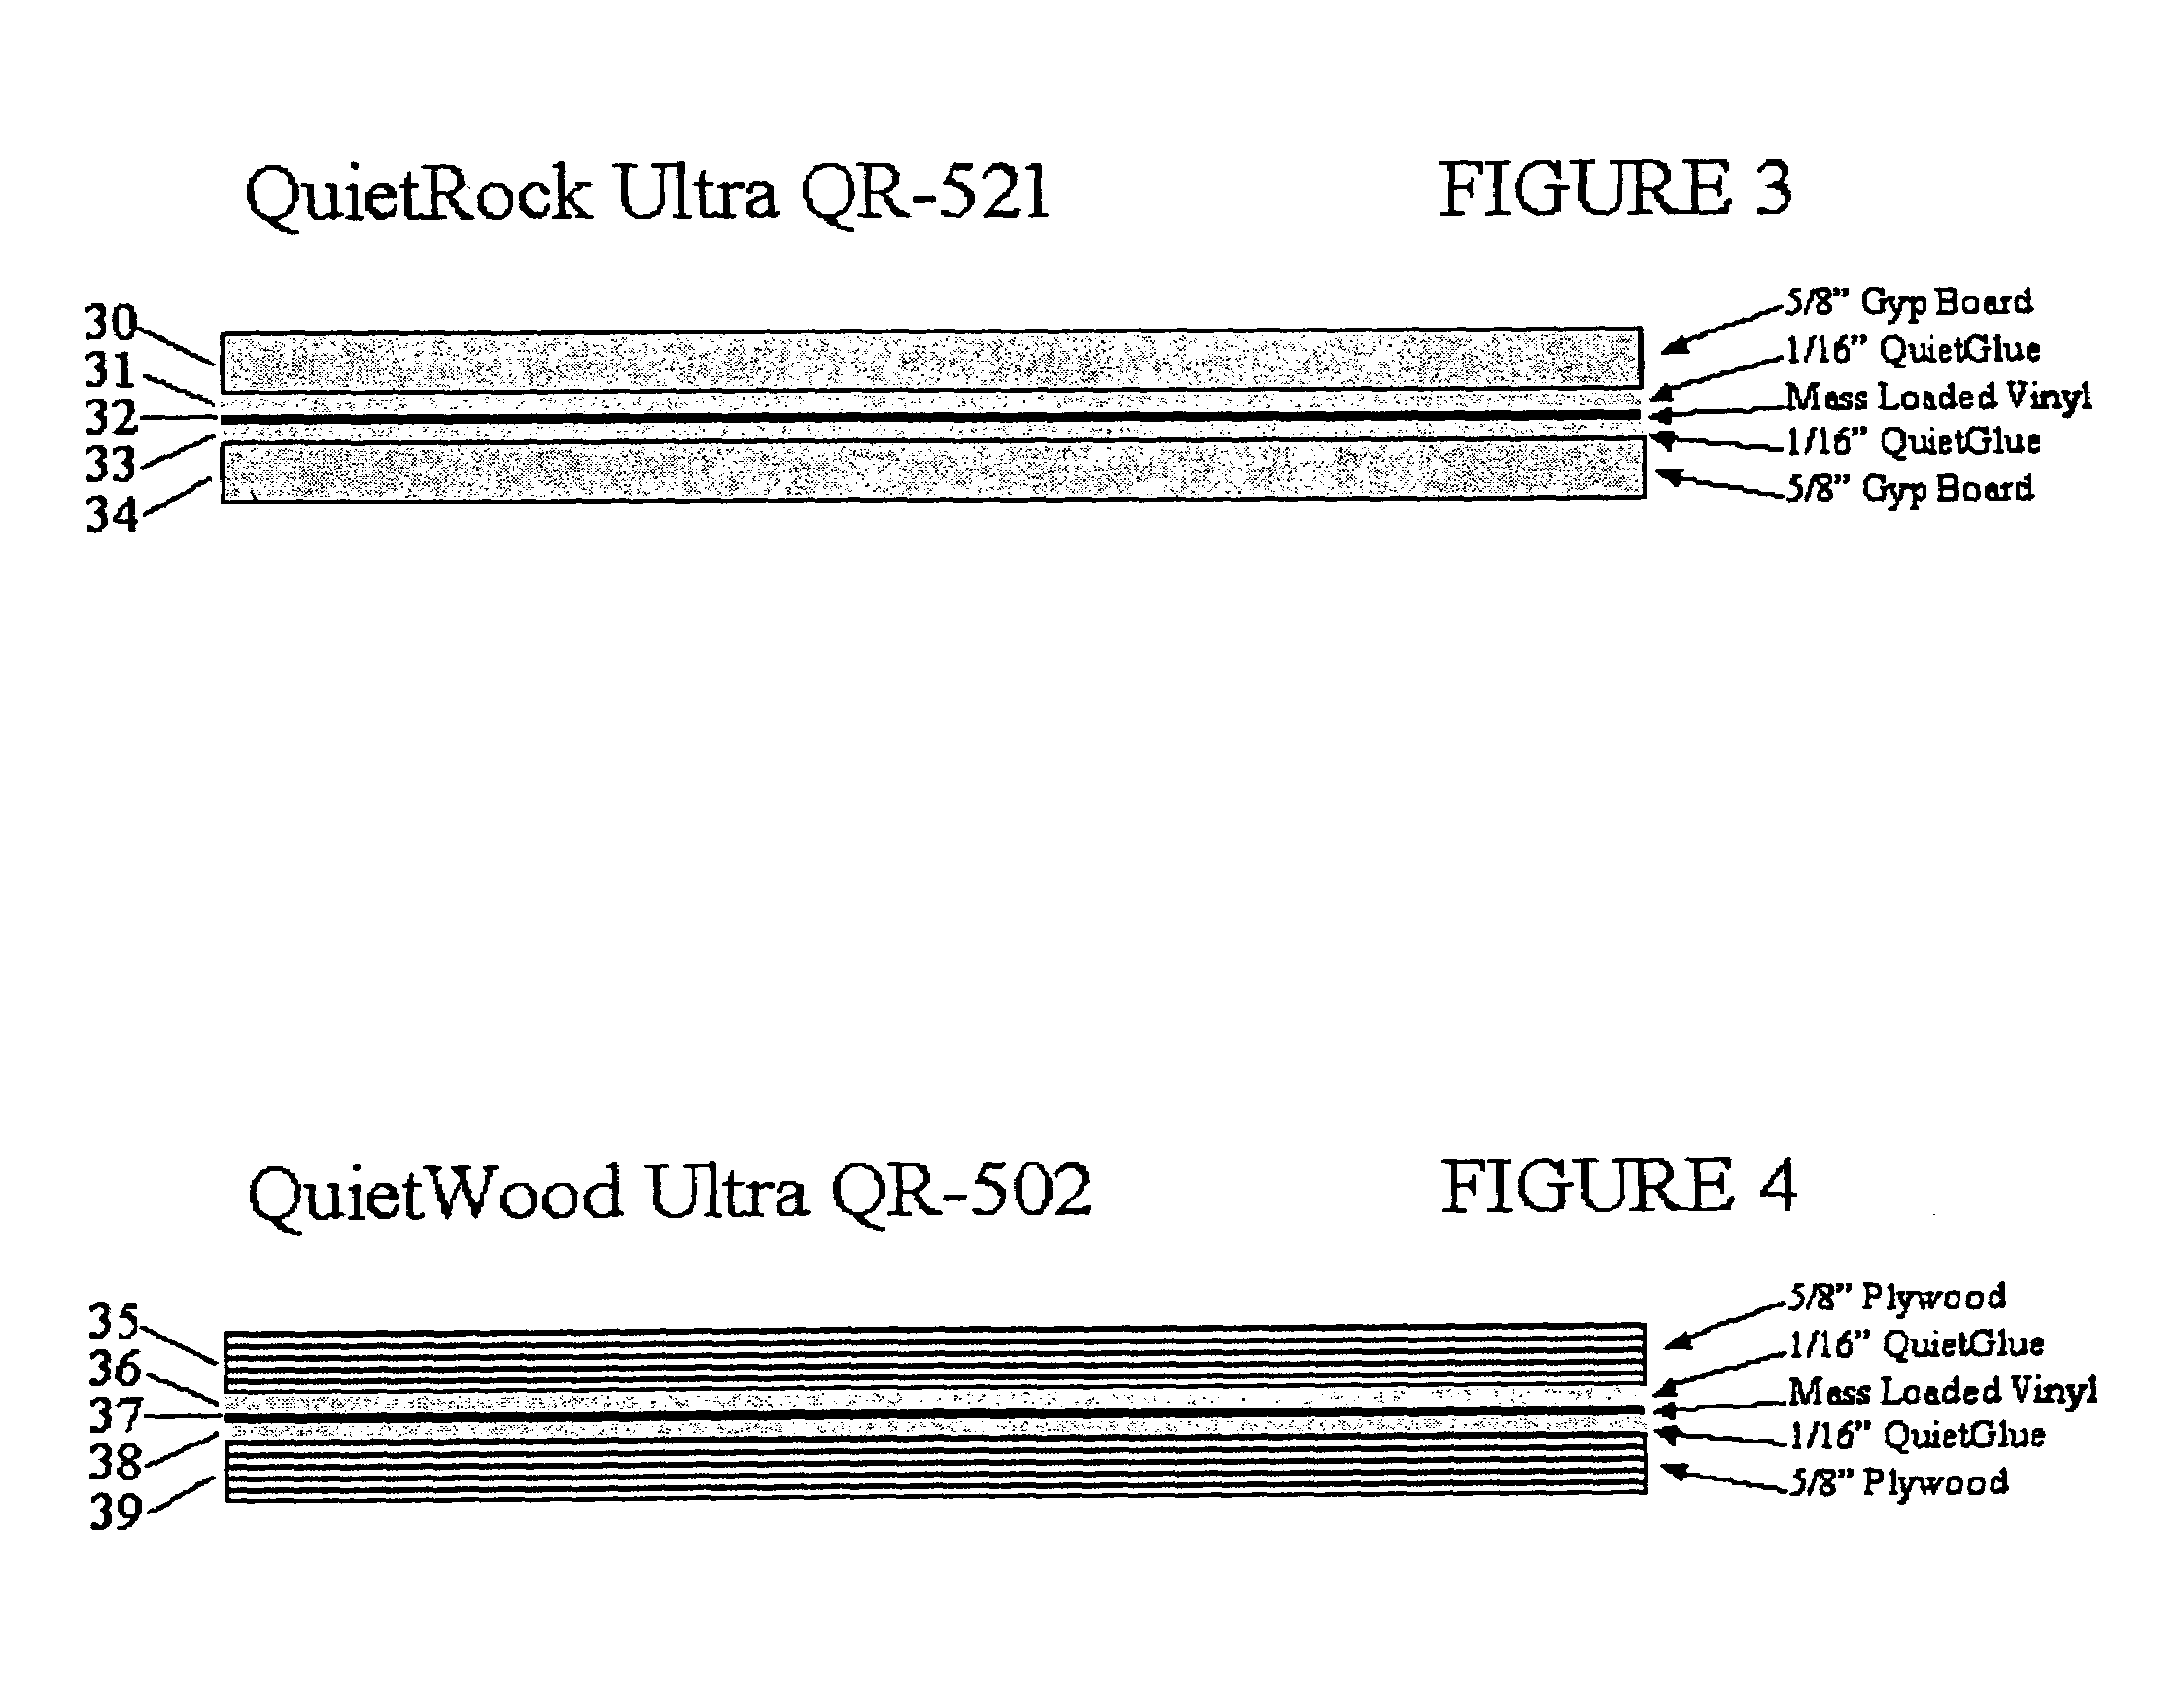 Acoustical sound proofing material and methods for manufacturing same